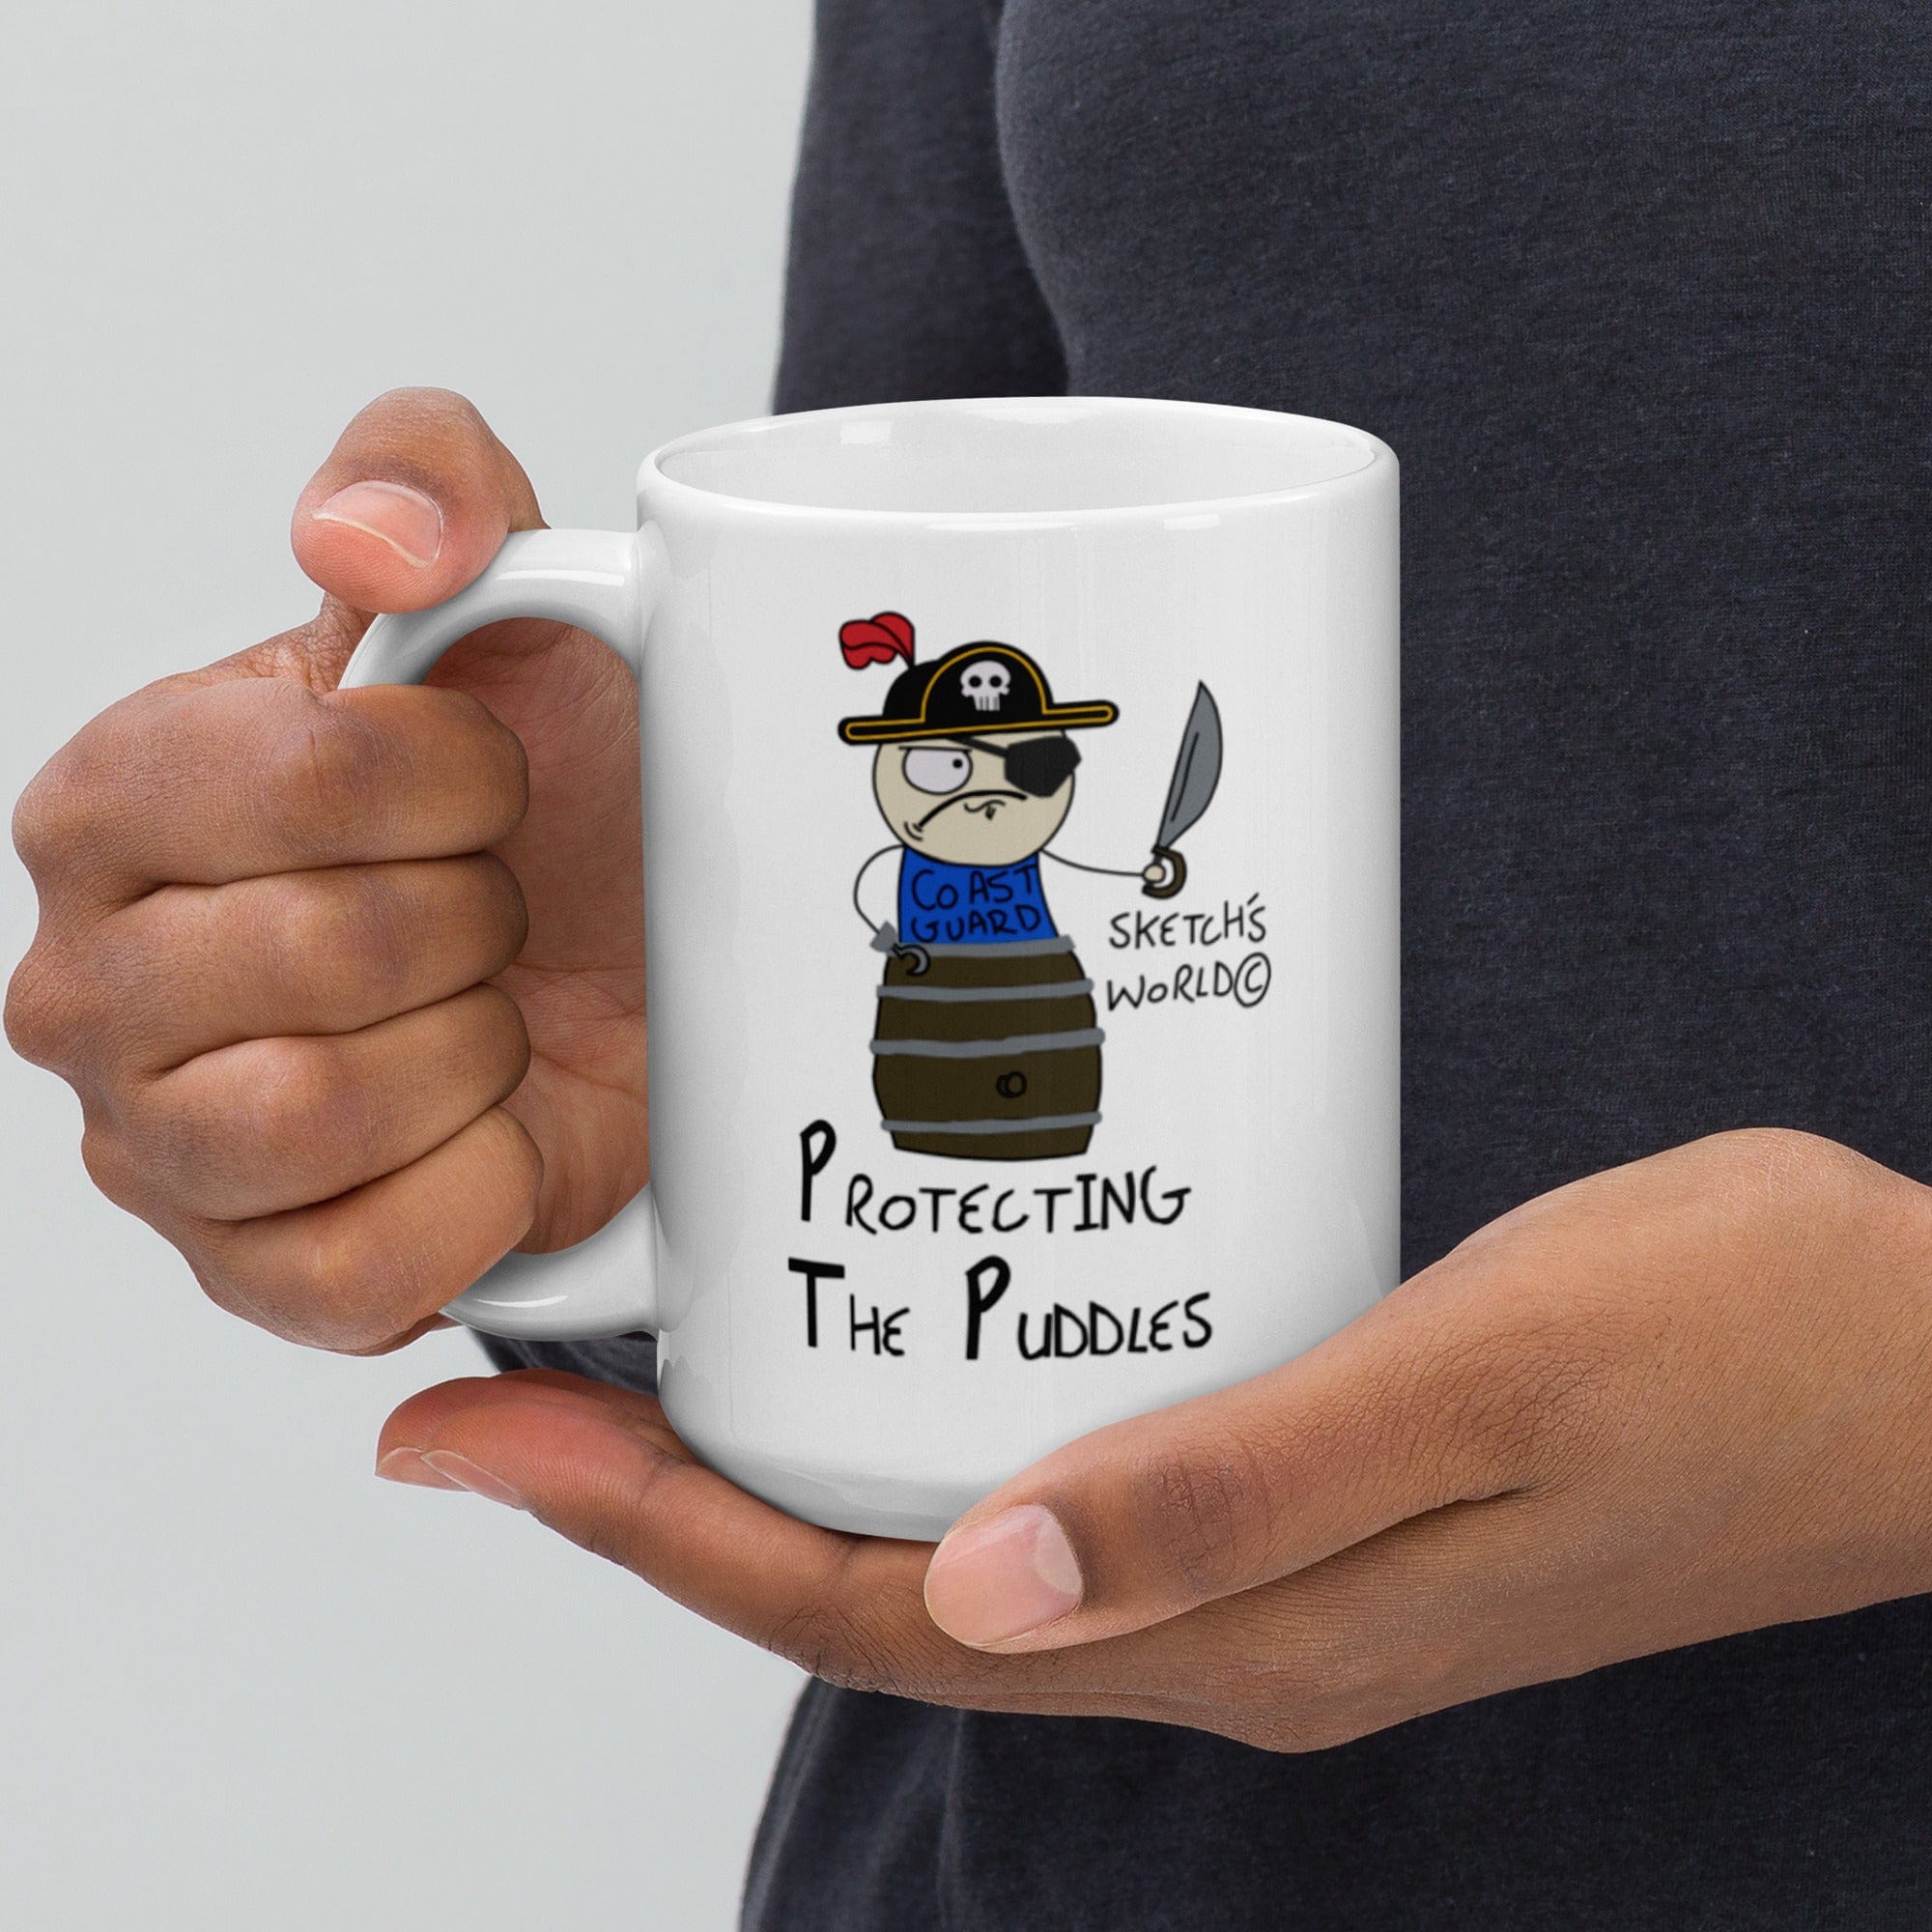 Tactical Gear Junkie Sketch's World © Officially Licensed - Protecting the Puddles Coast Guard Ceramic Mug